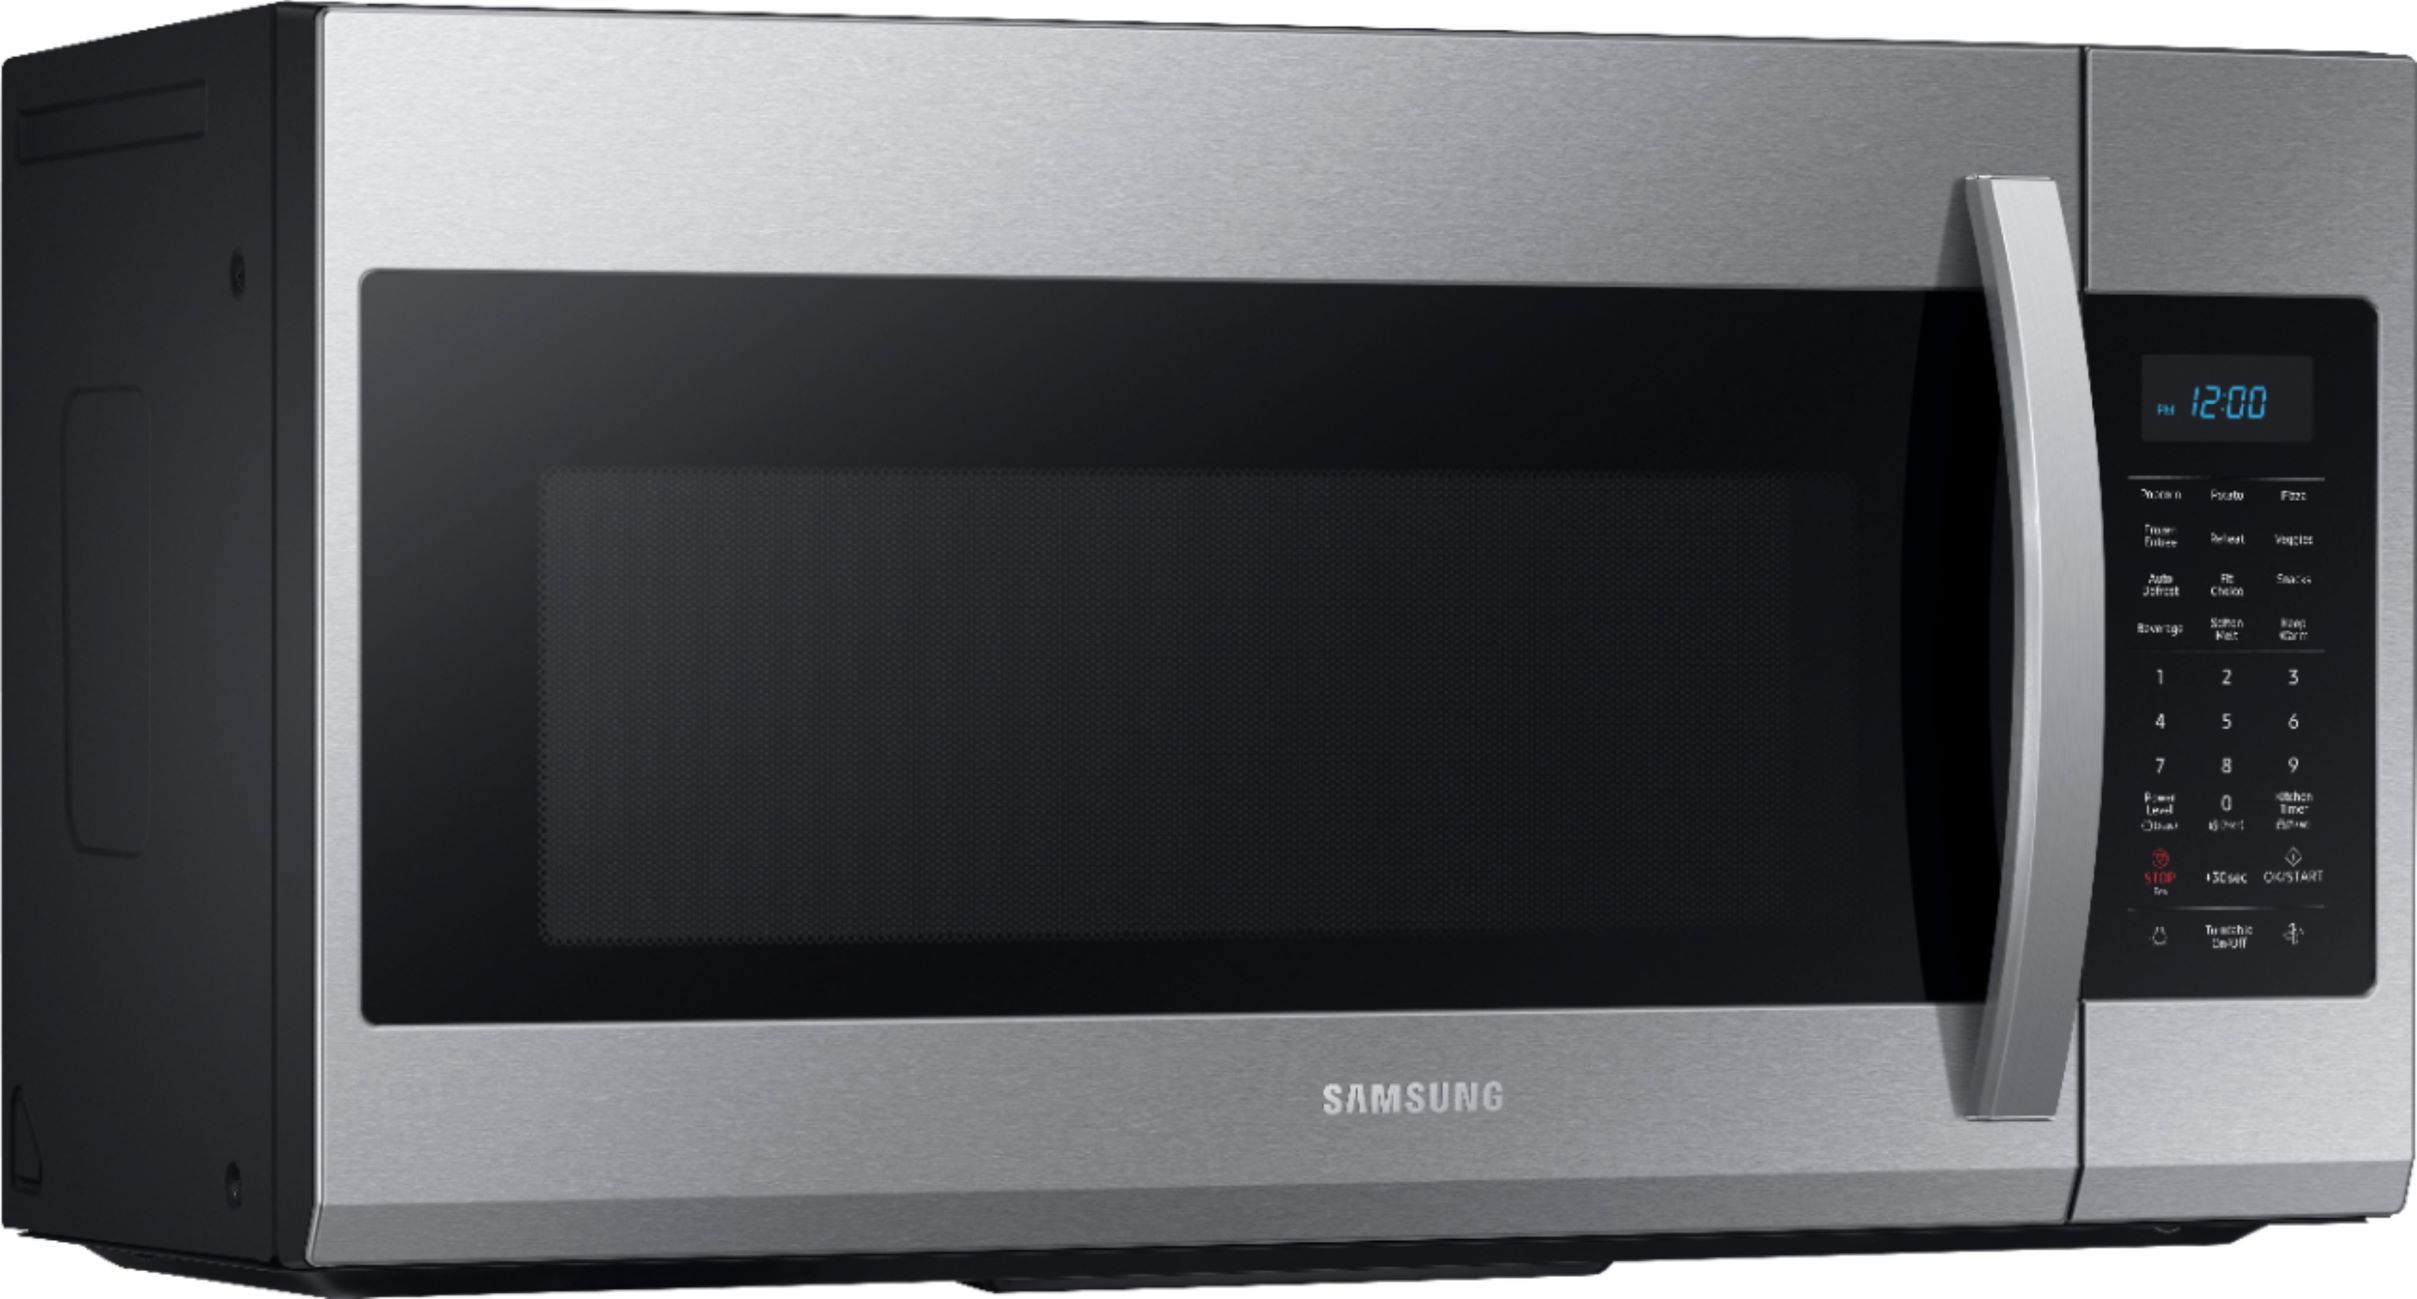 How To Fix The Error Code E-95 For Samsung Microwave